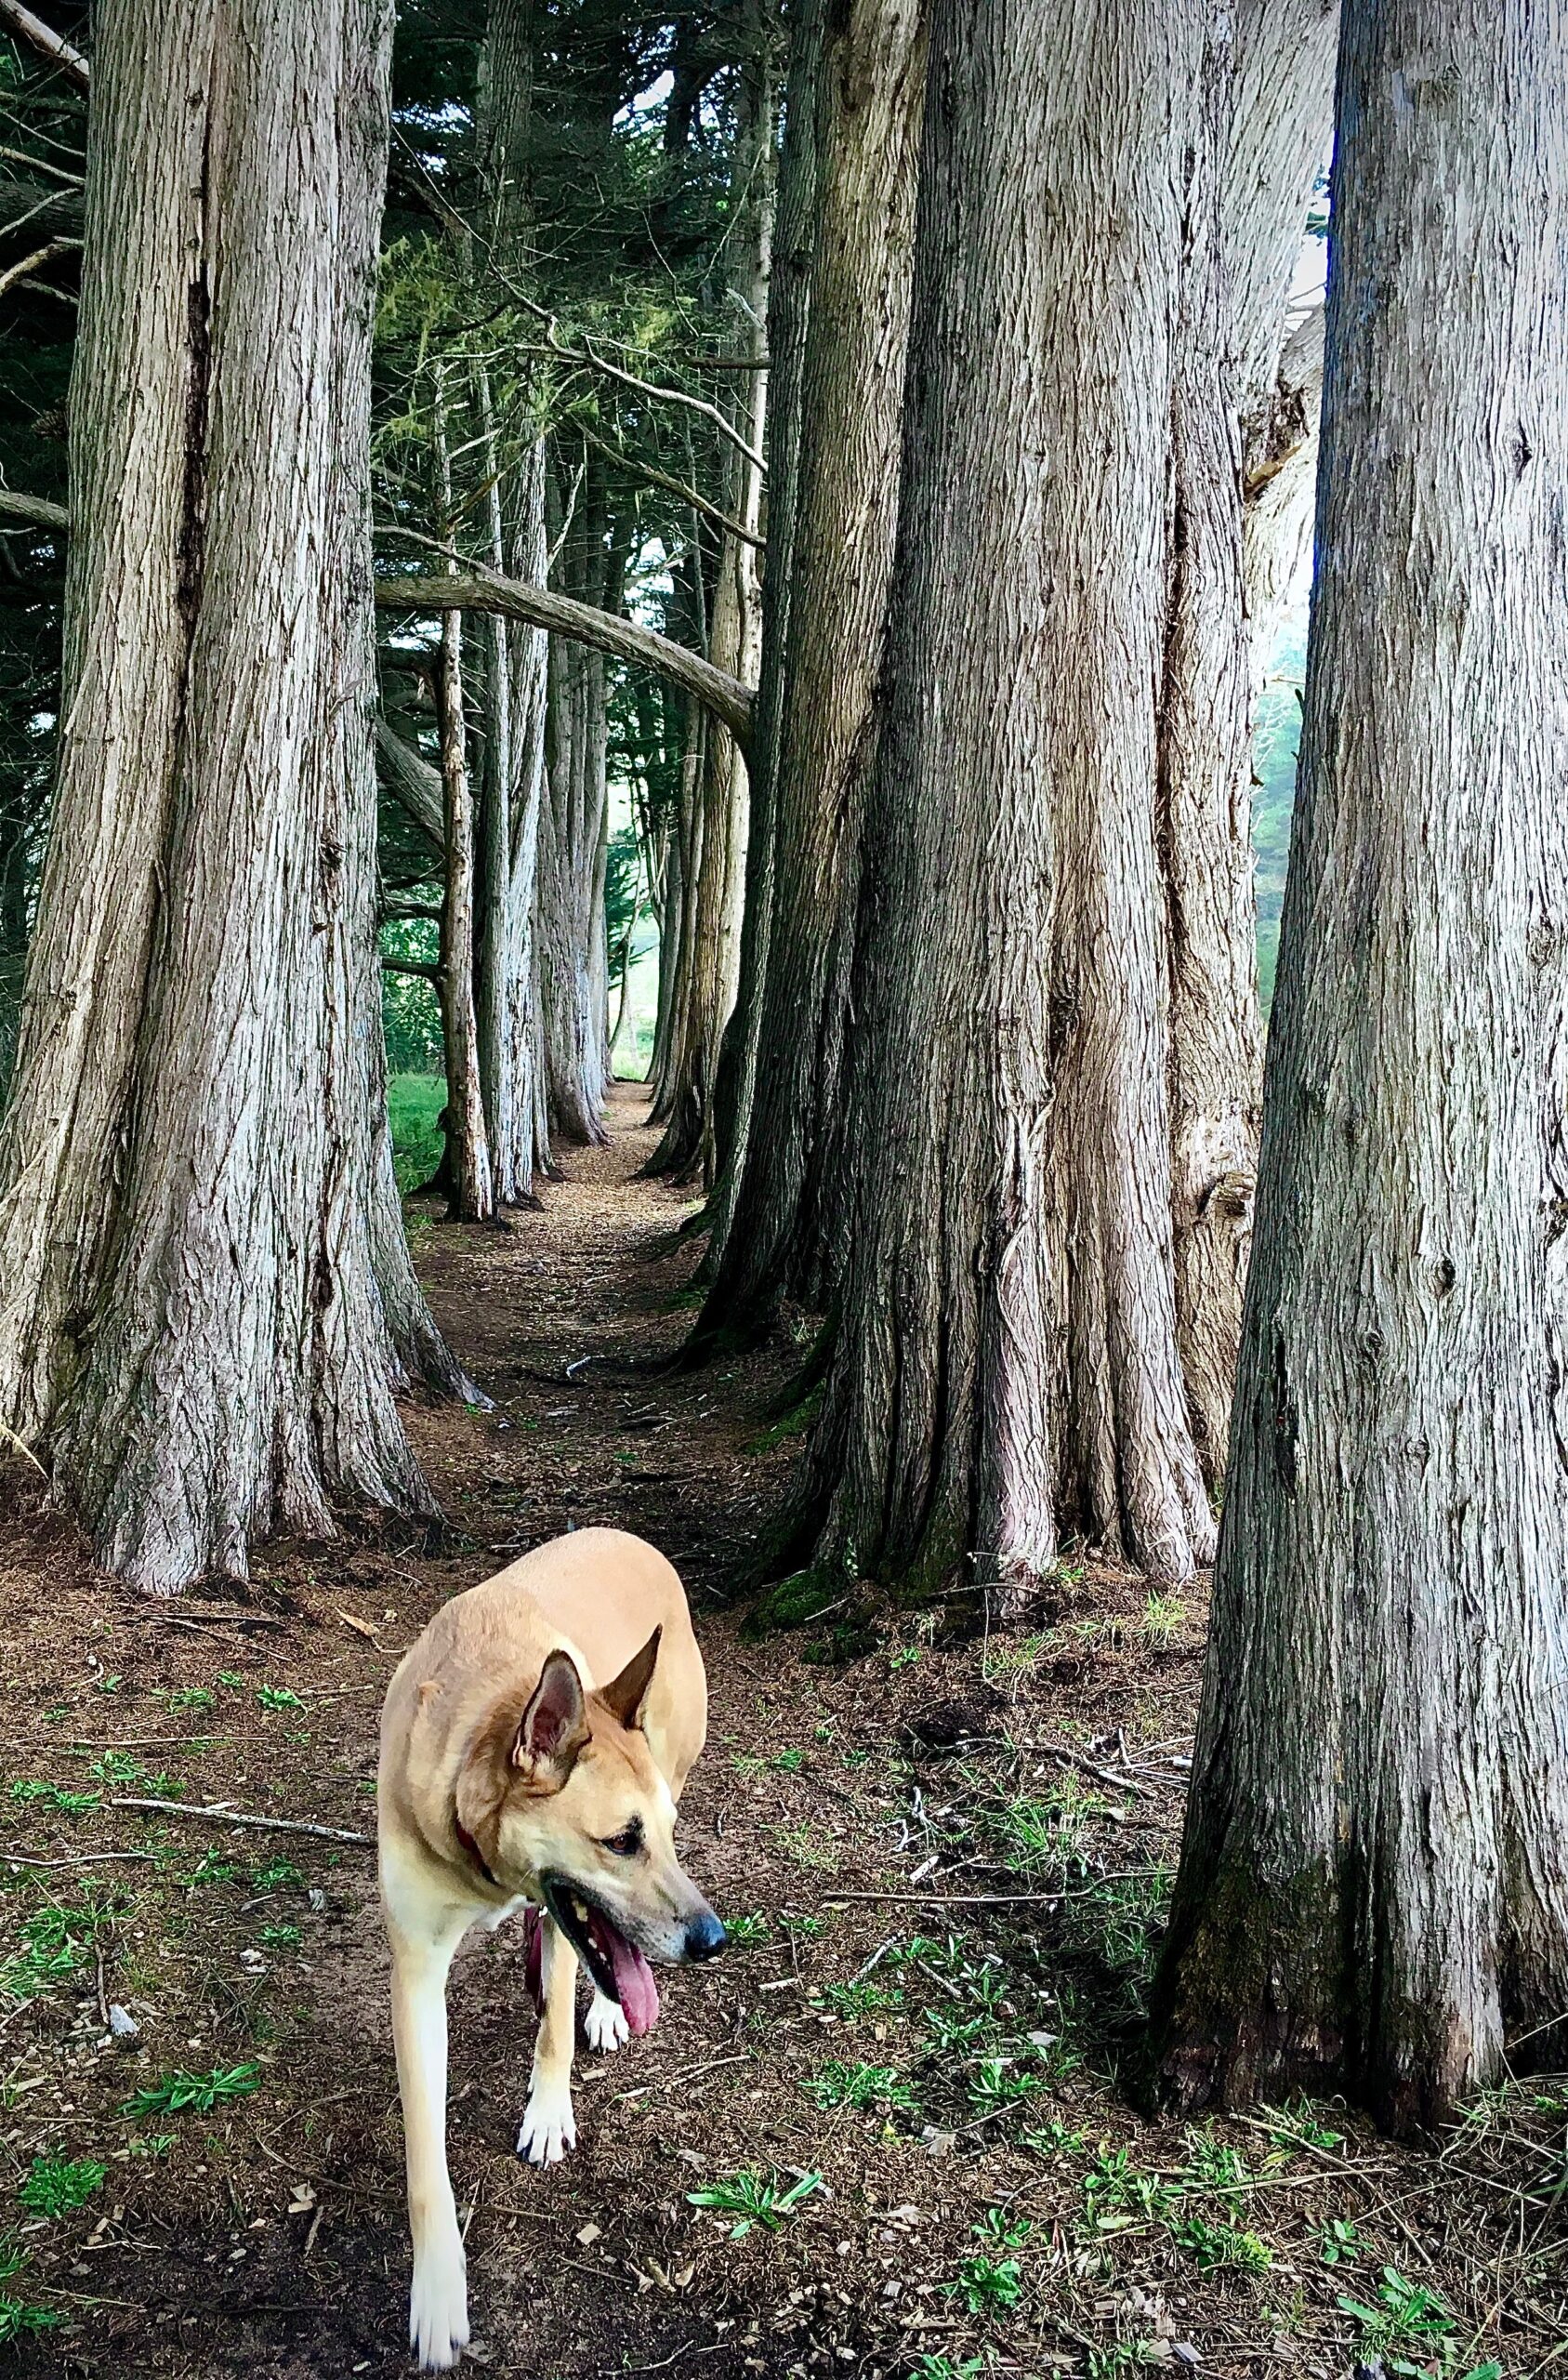 A dog is walking through a wooded area.